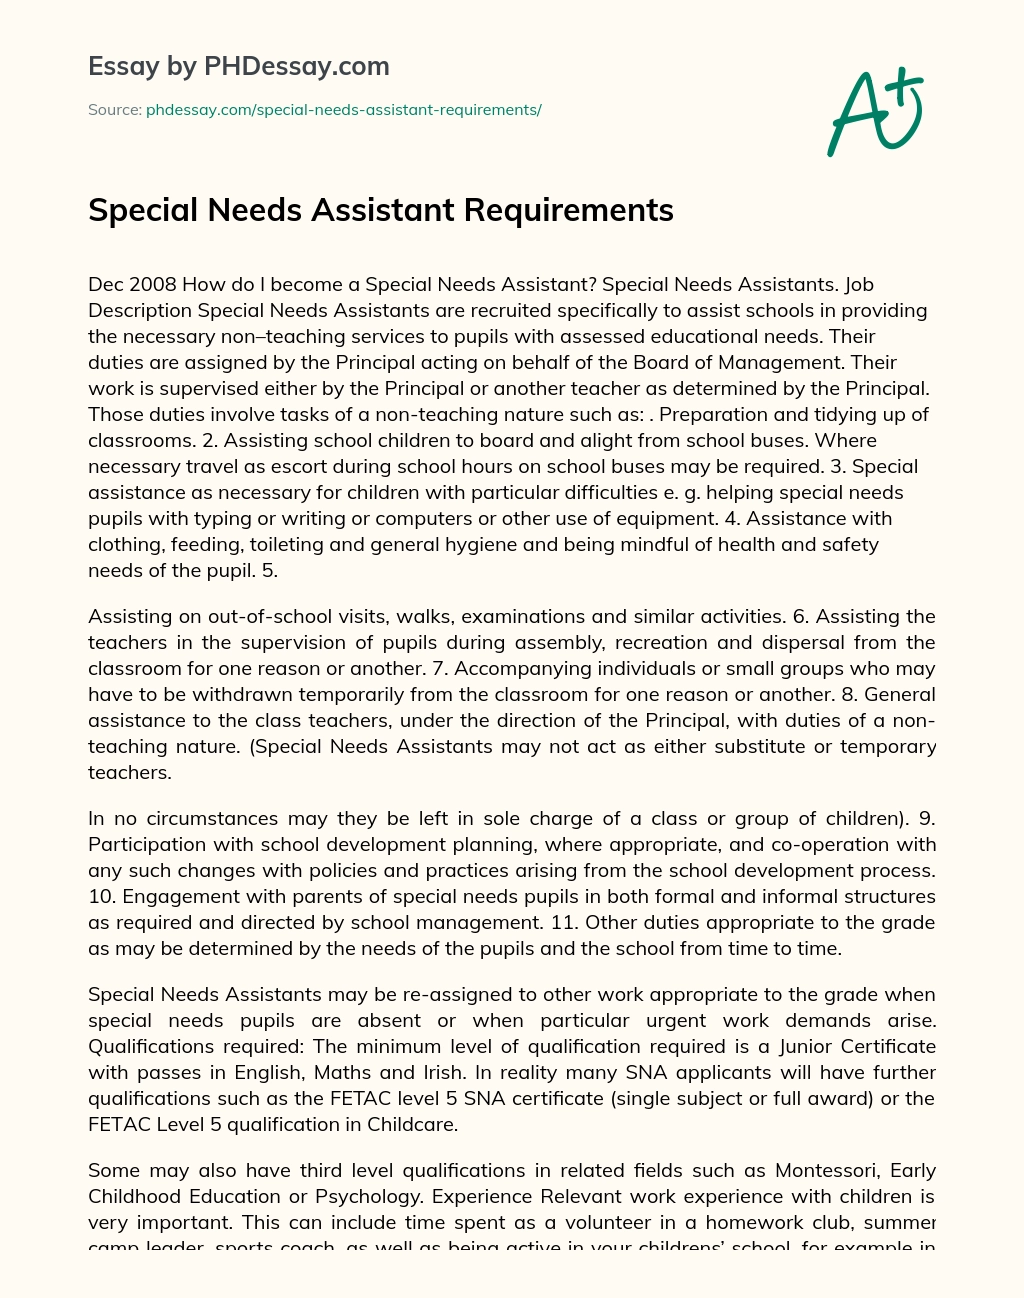 Special Needs Assistant Requirements essay